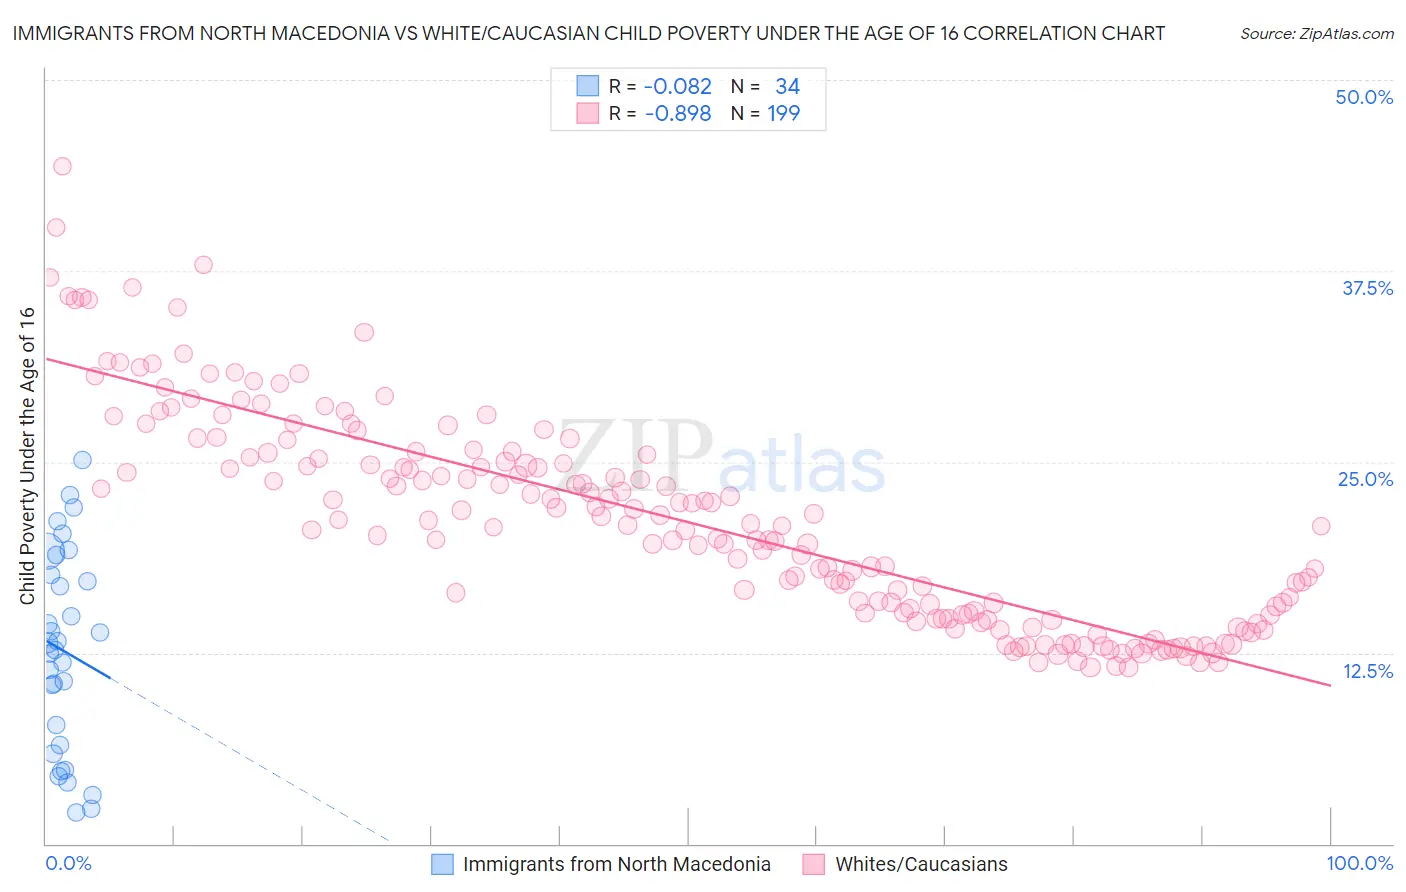 Immigrants from North Macedonia vs White/Caucasian Child Poverty Under the Age of 16